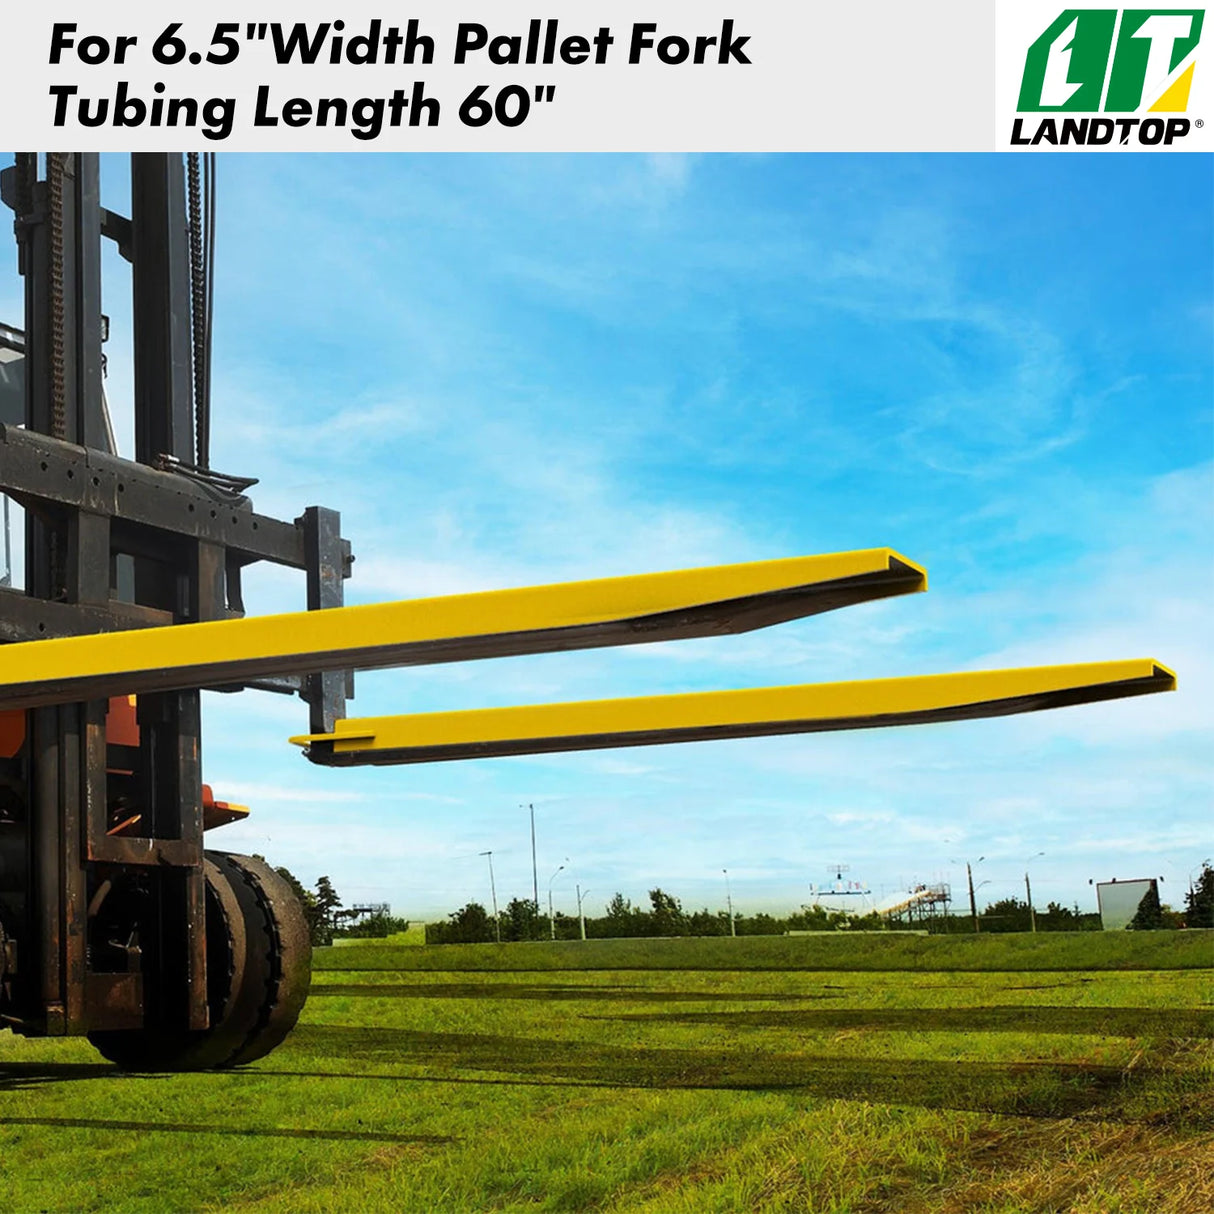 Pallet Forks Extensions 60 Inch Length,Heavy Duty for Forklift,Forklift Extensions 6.5 Inch Width Tractor Skid Steer,Loader Bucket attachments Accessories,Yellow